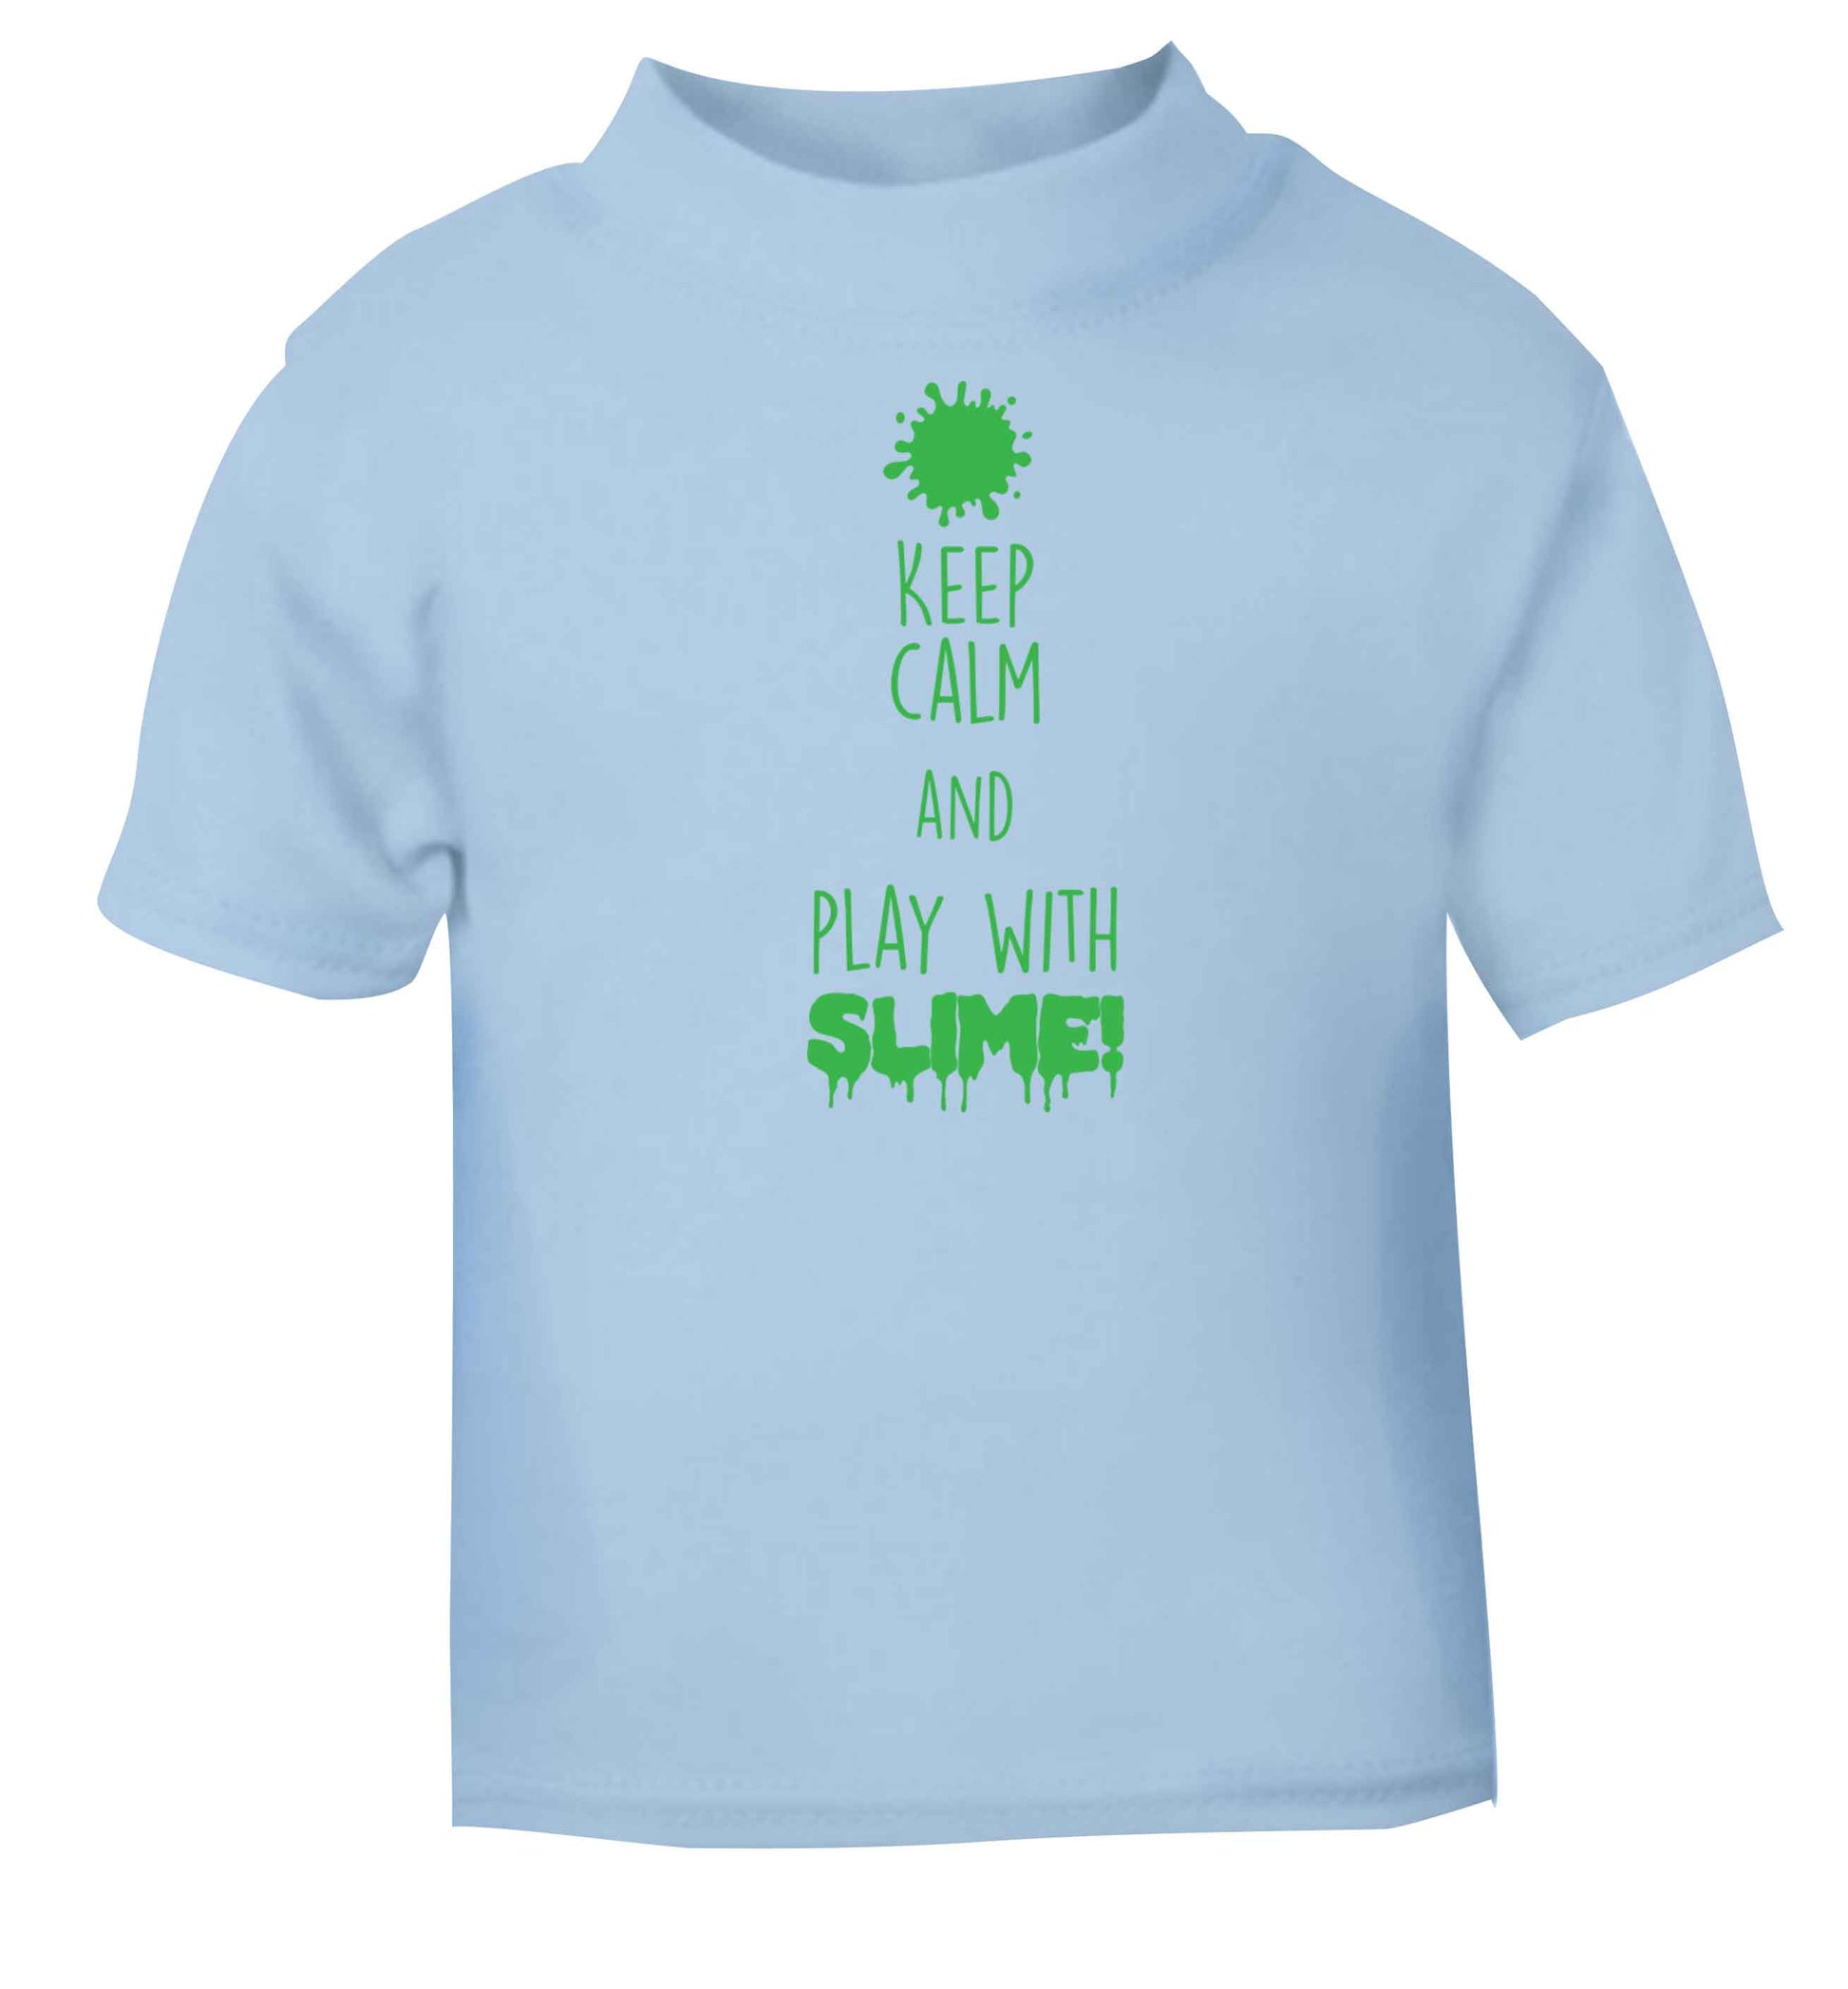 Neon green keep calm and play with slime!light blue baby toddler Tshirt 2 Years